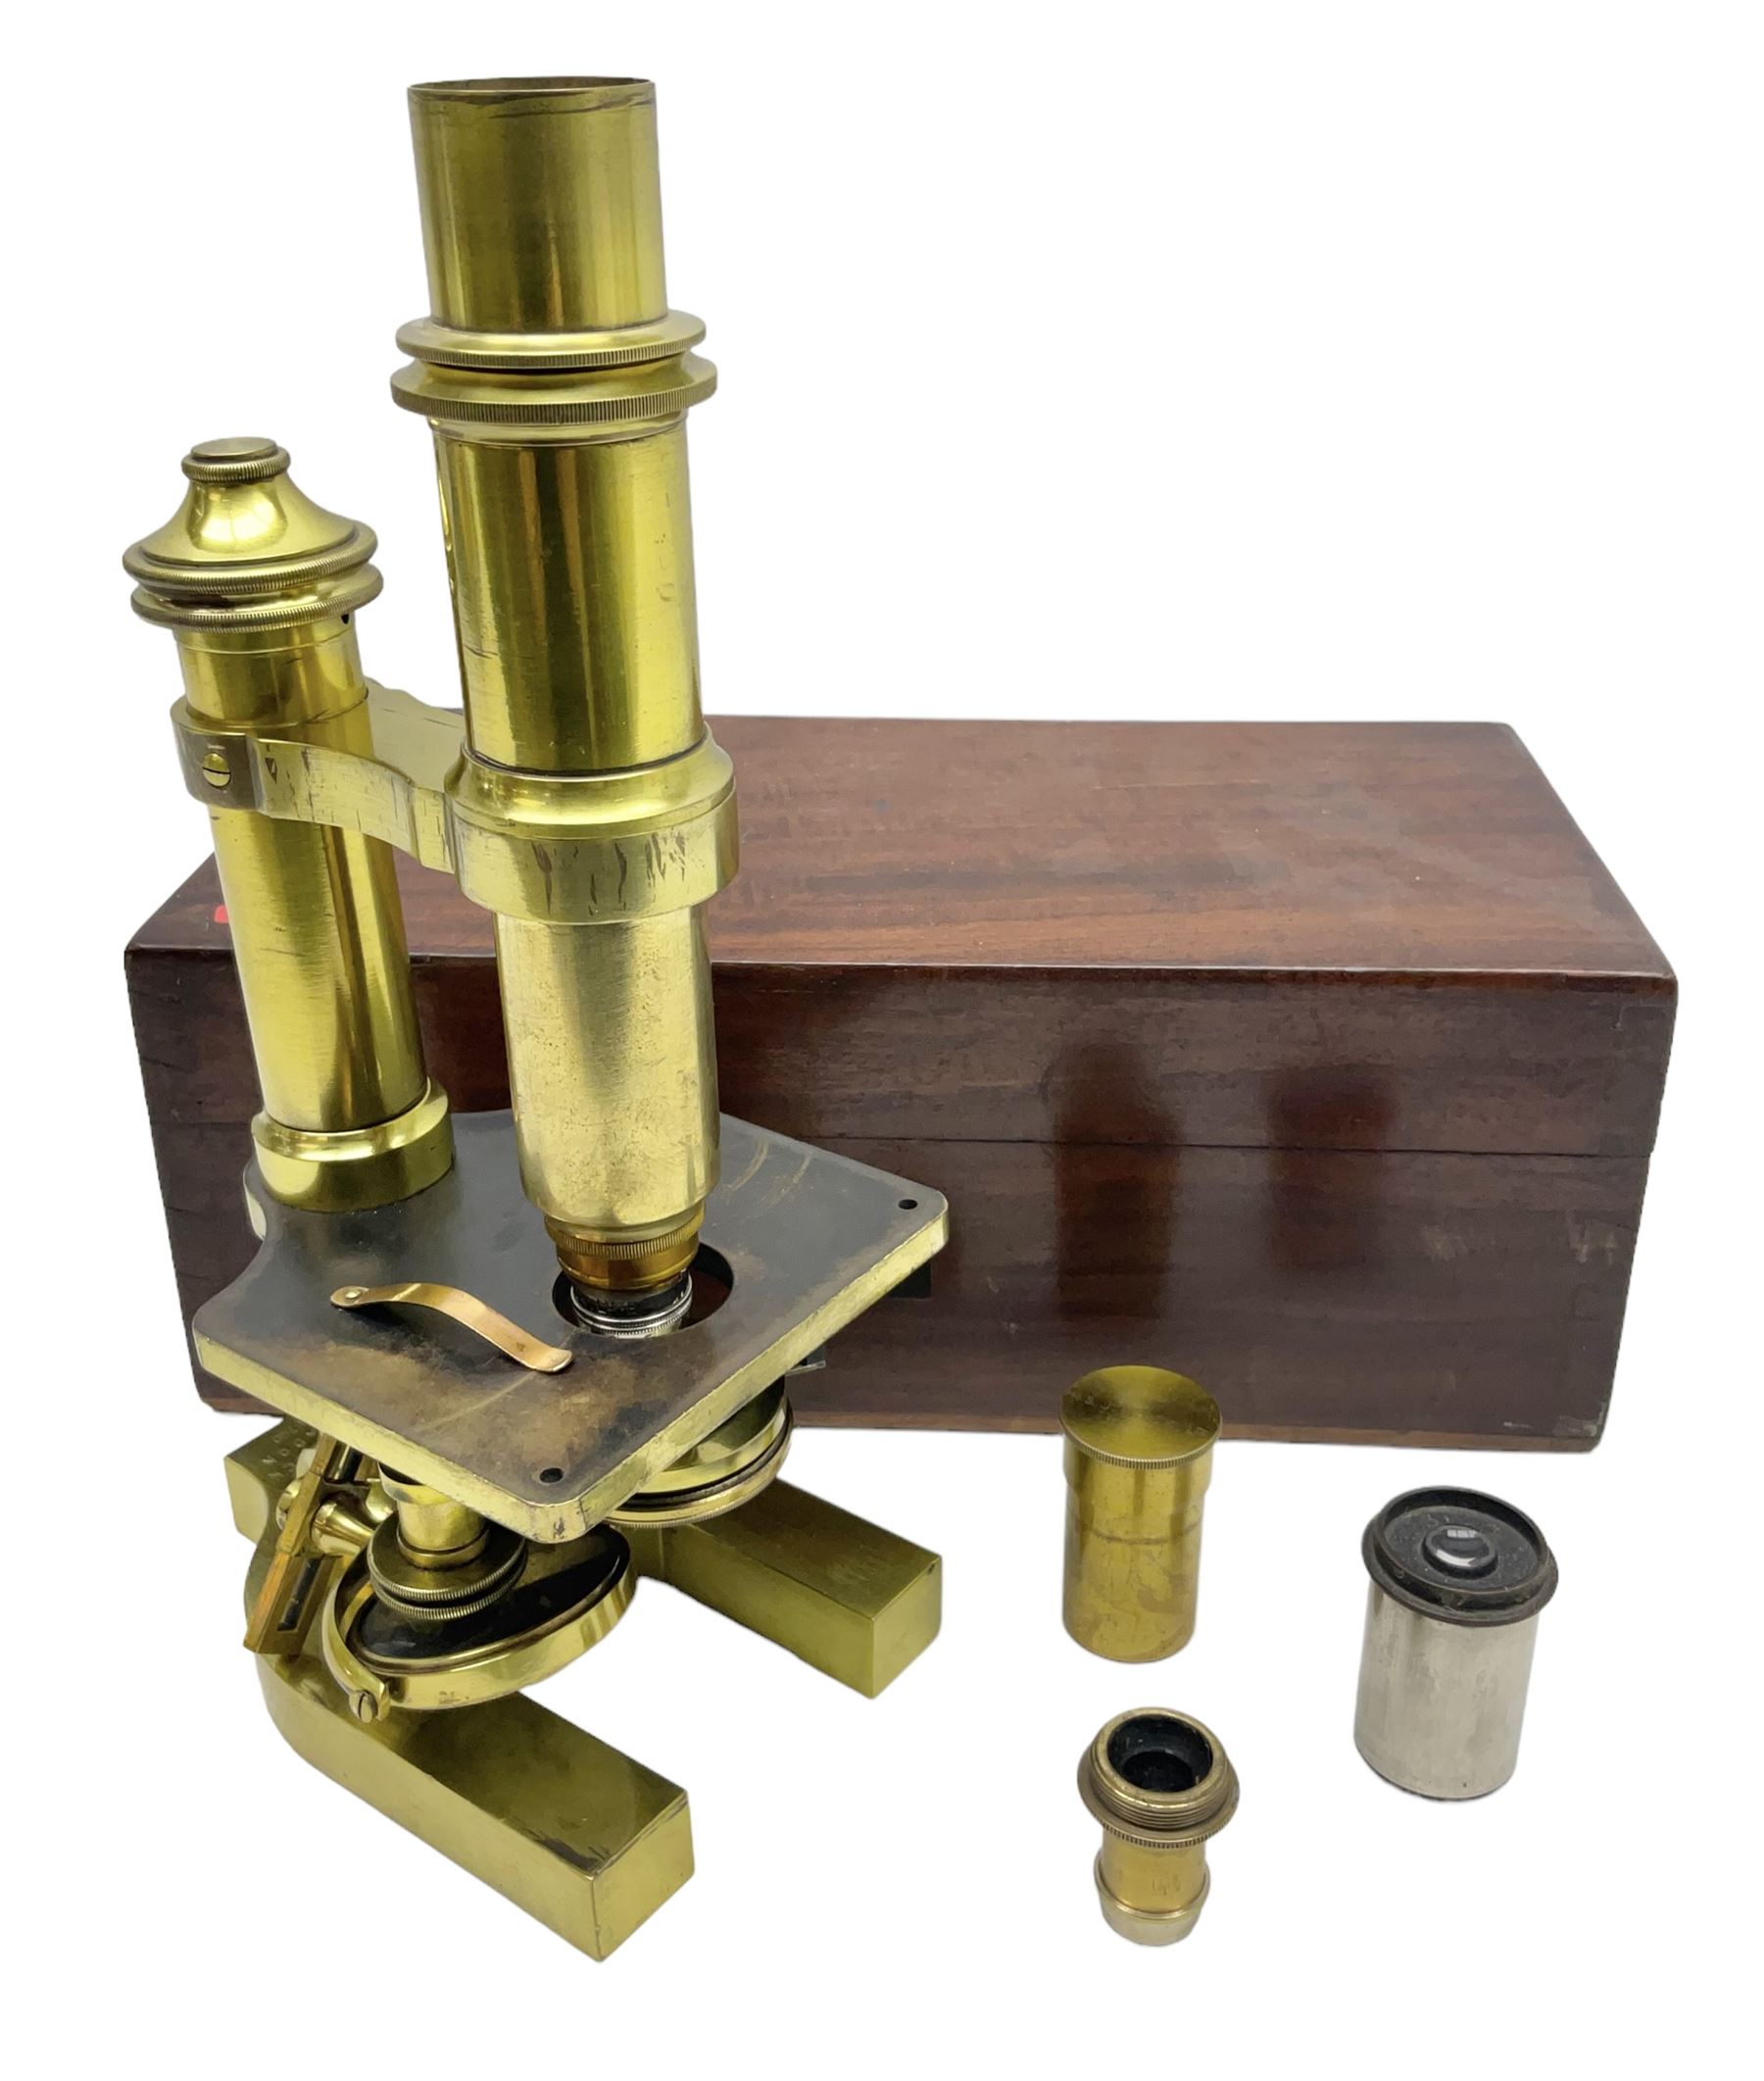 19th century brass monocular microscope by R. & J. Beck London No.18760 with hinged column and pitch